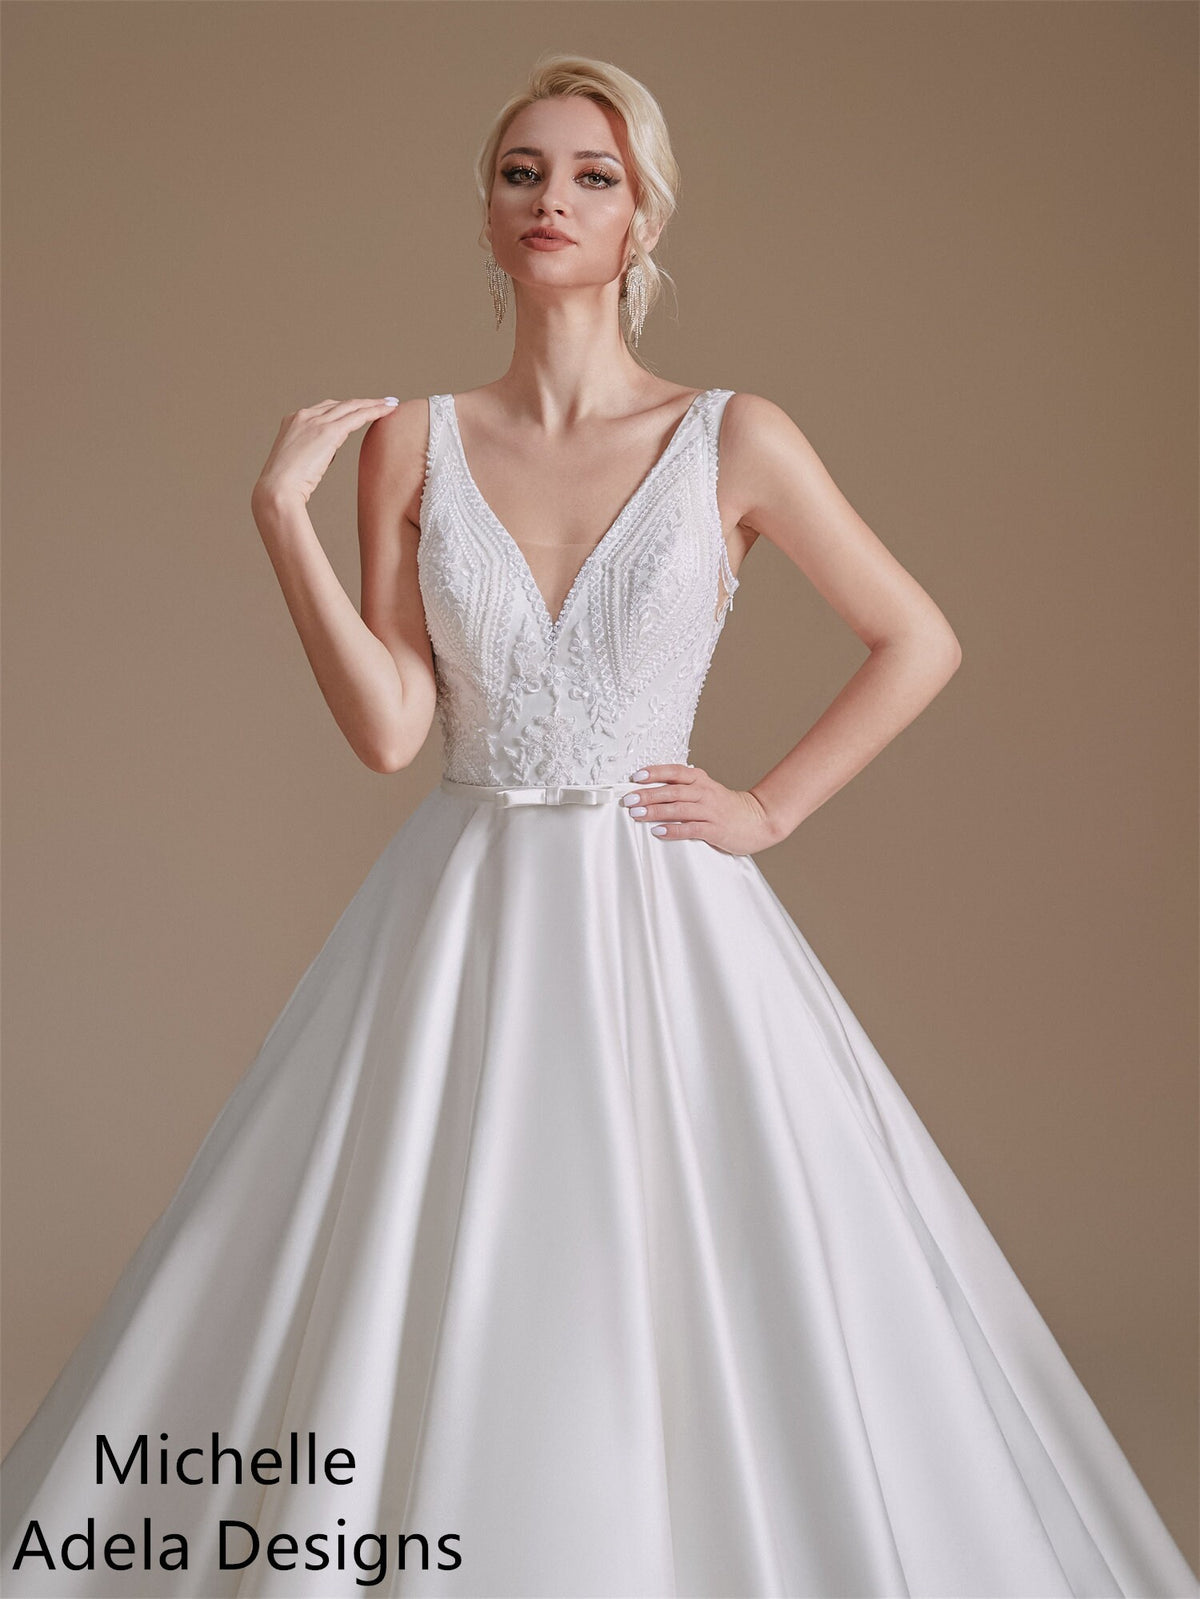 Timeless Style Satin with Lace Aline Wedding Dress Bridal Gown Sleeveless No Train Full Aline Minimalist Simple Design Illusion Back